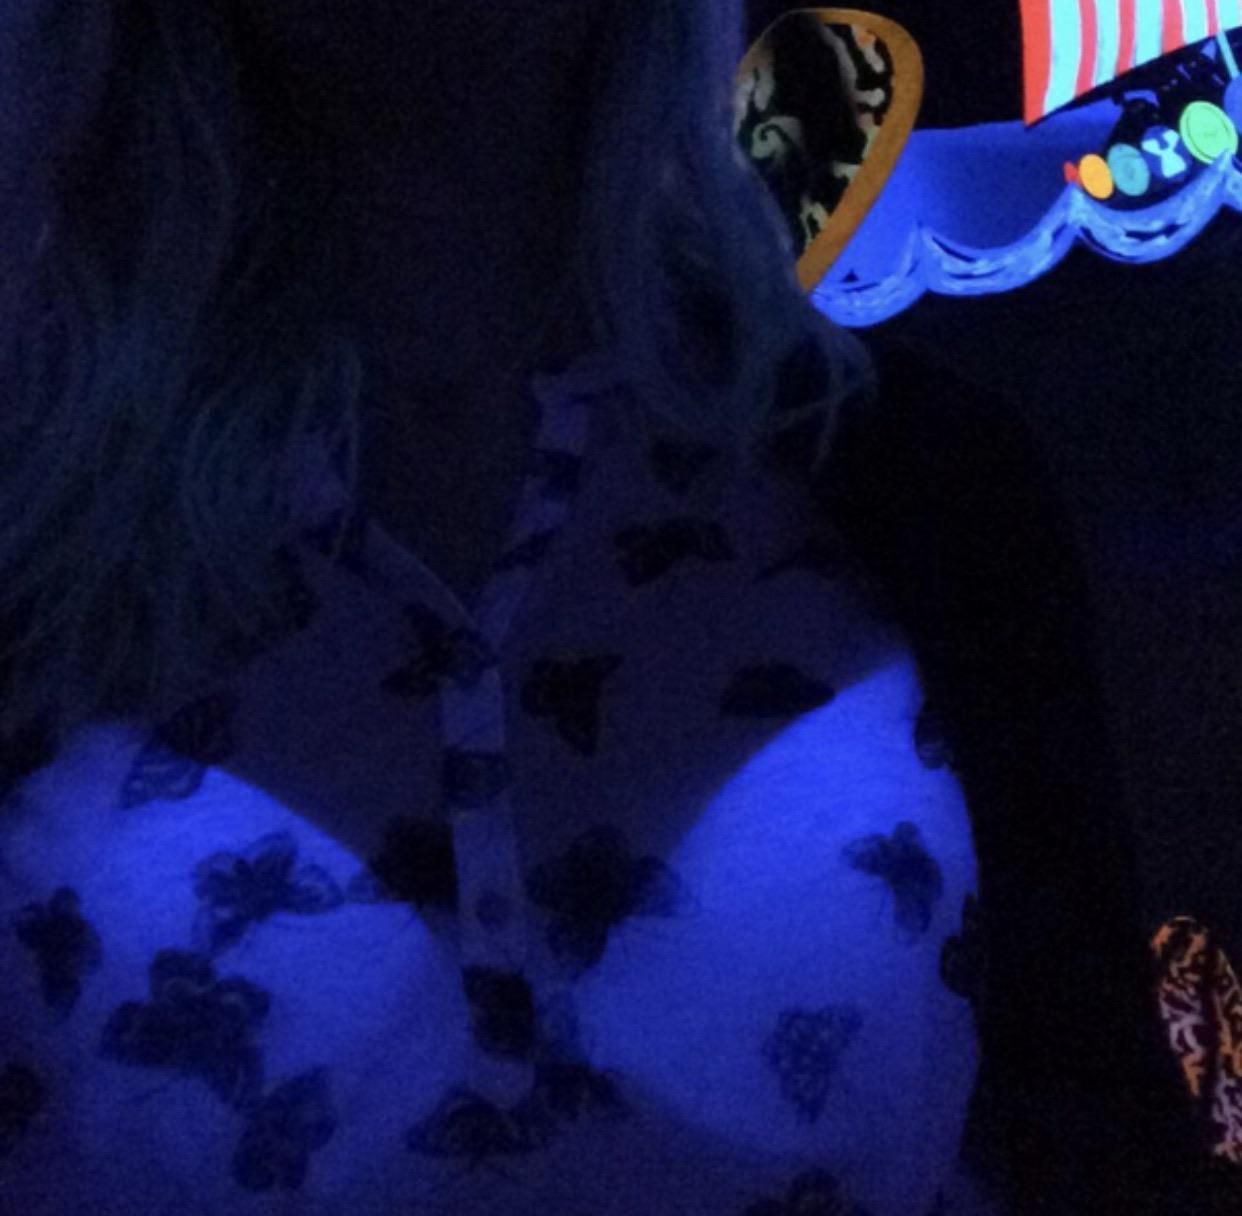 I didn’t think through my outfit choice before going to glow in the dark mini putt on a date